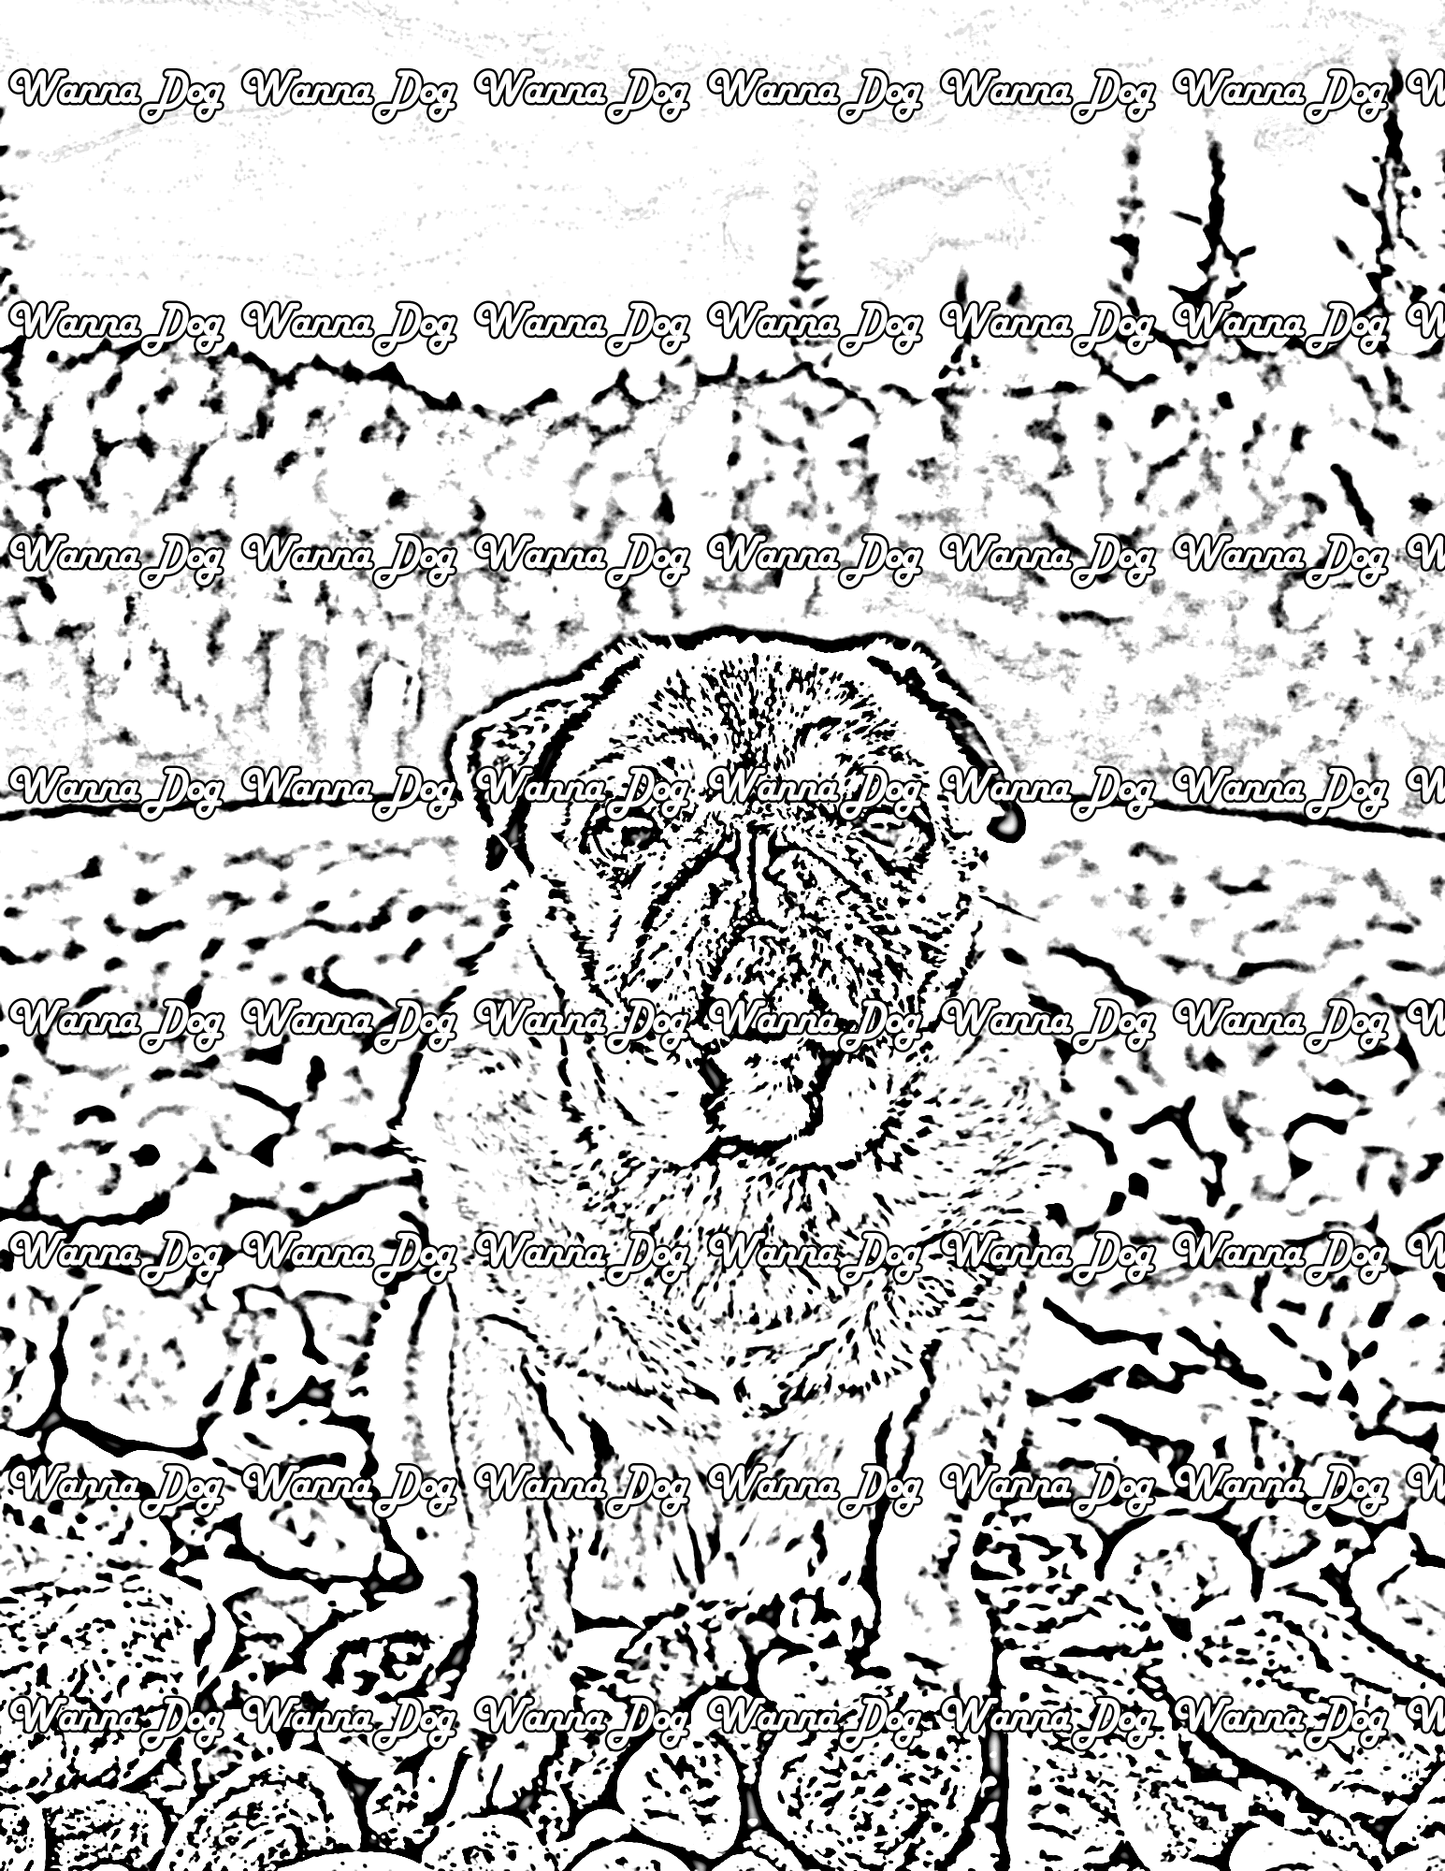 Pug Coloring Page of a pug on rocks